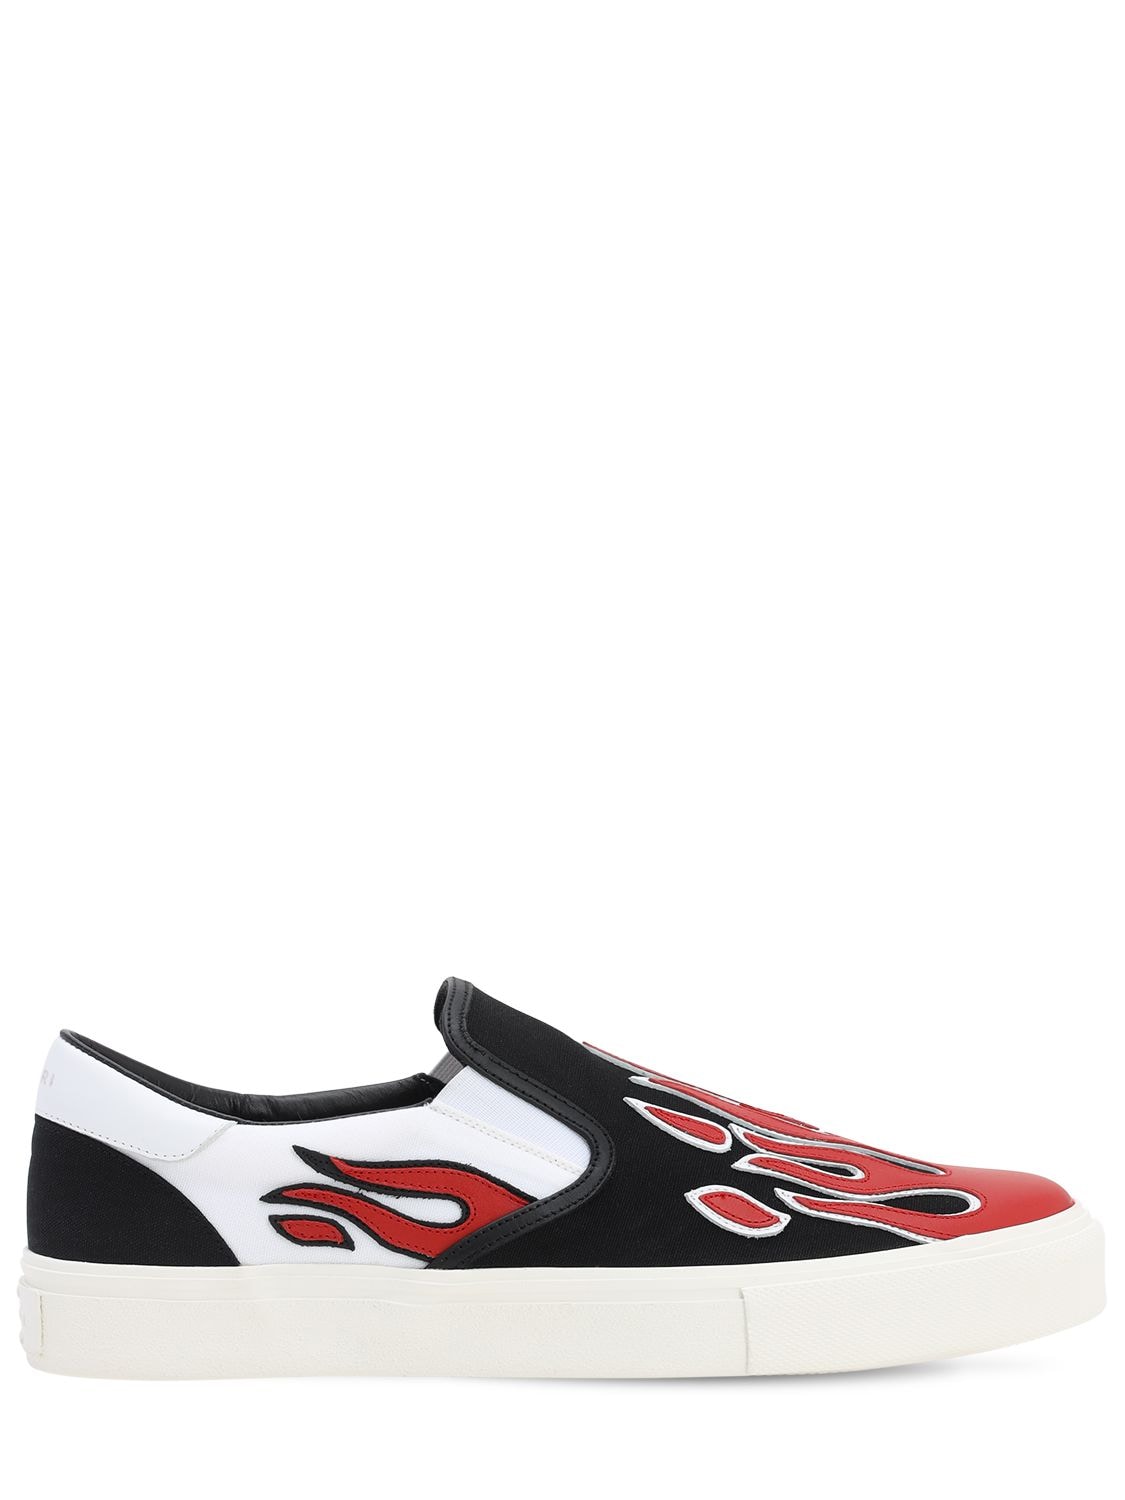 AMIRI FLAME COTTON CANVAS SLIP-ON trainers,71IWUE017-QLDS0